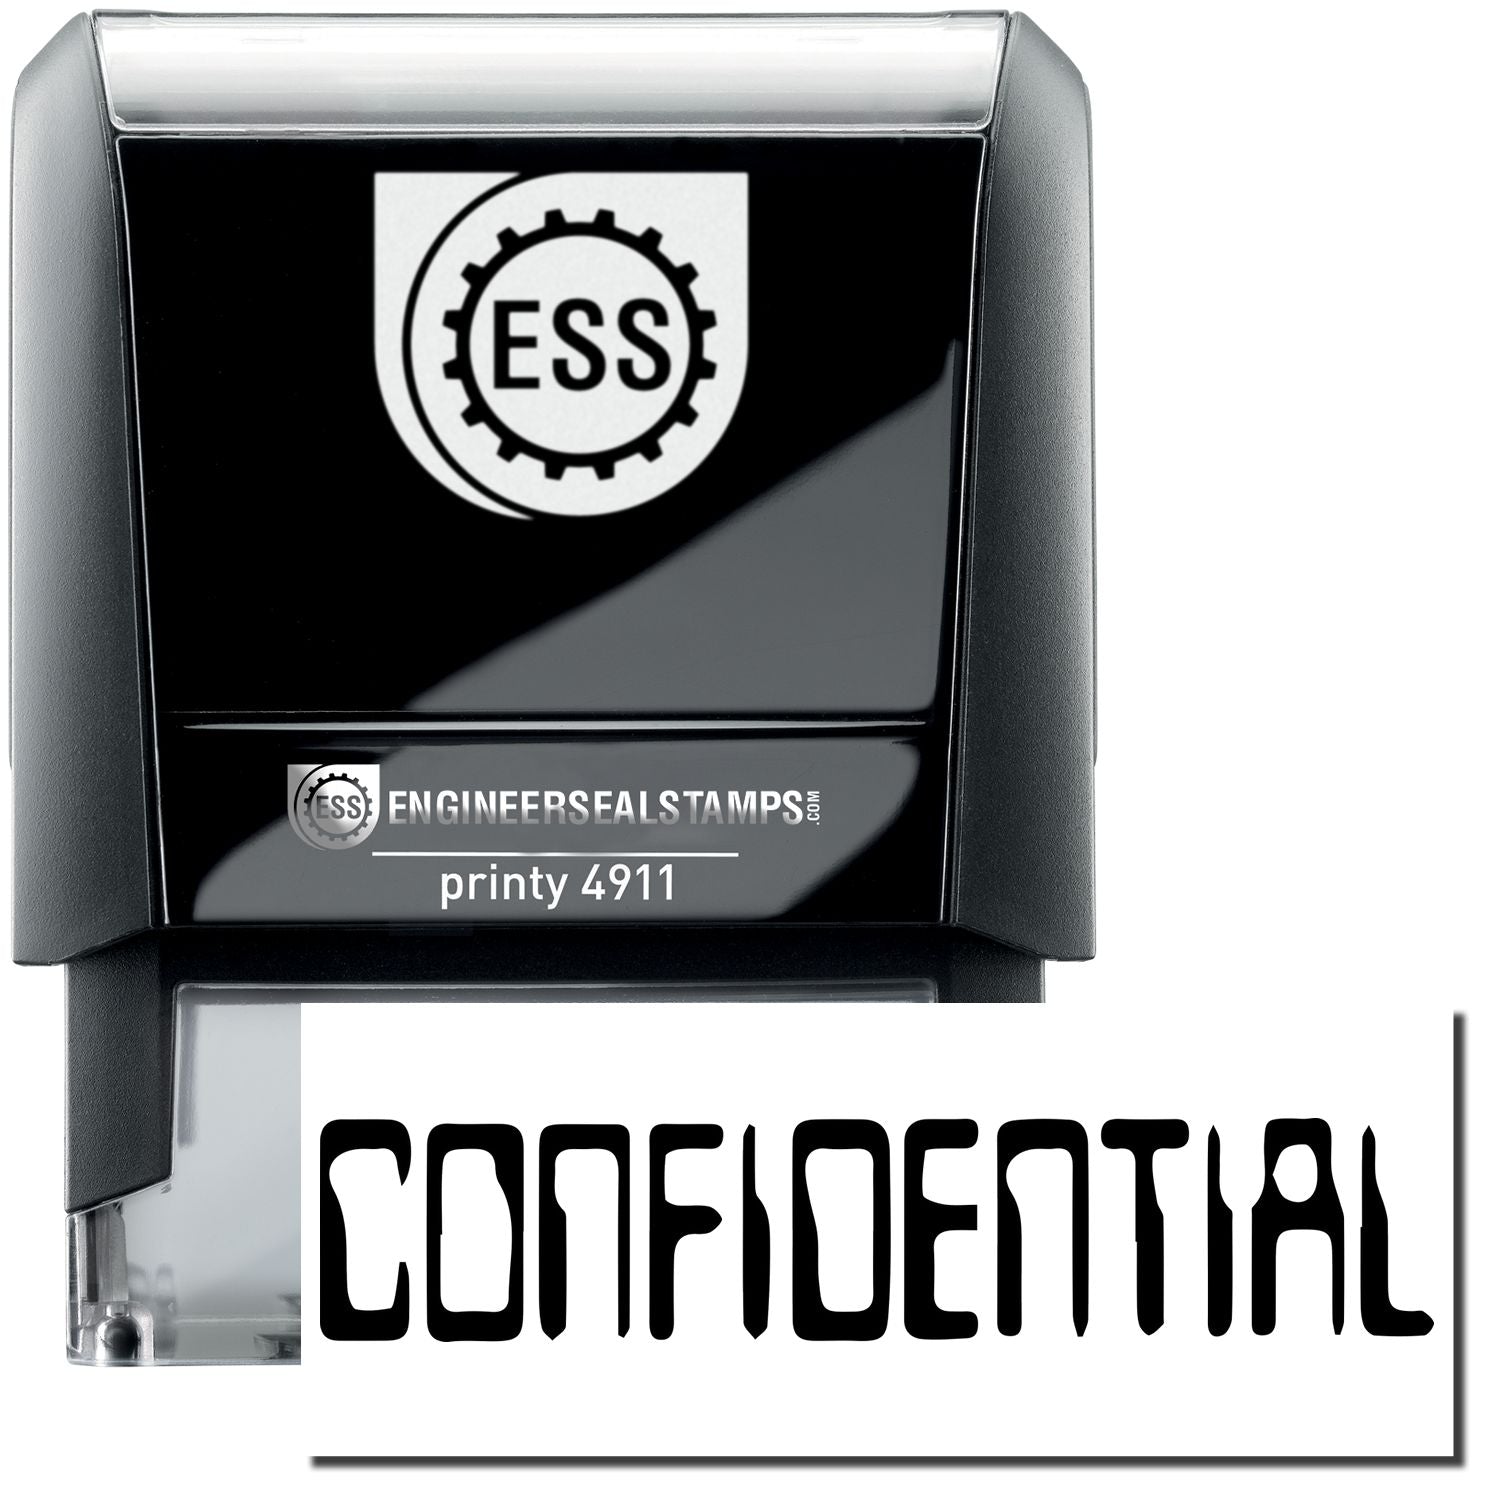 A self-inking stamp with a stamped image showing how the text "CONFIDENTIAL" in a barcode font is displayed after stamping.